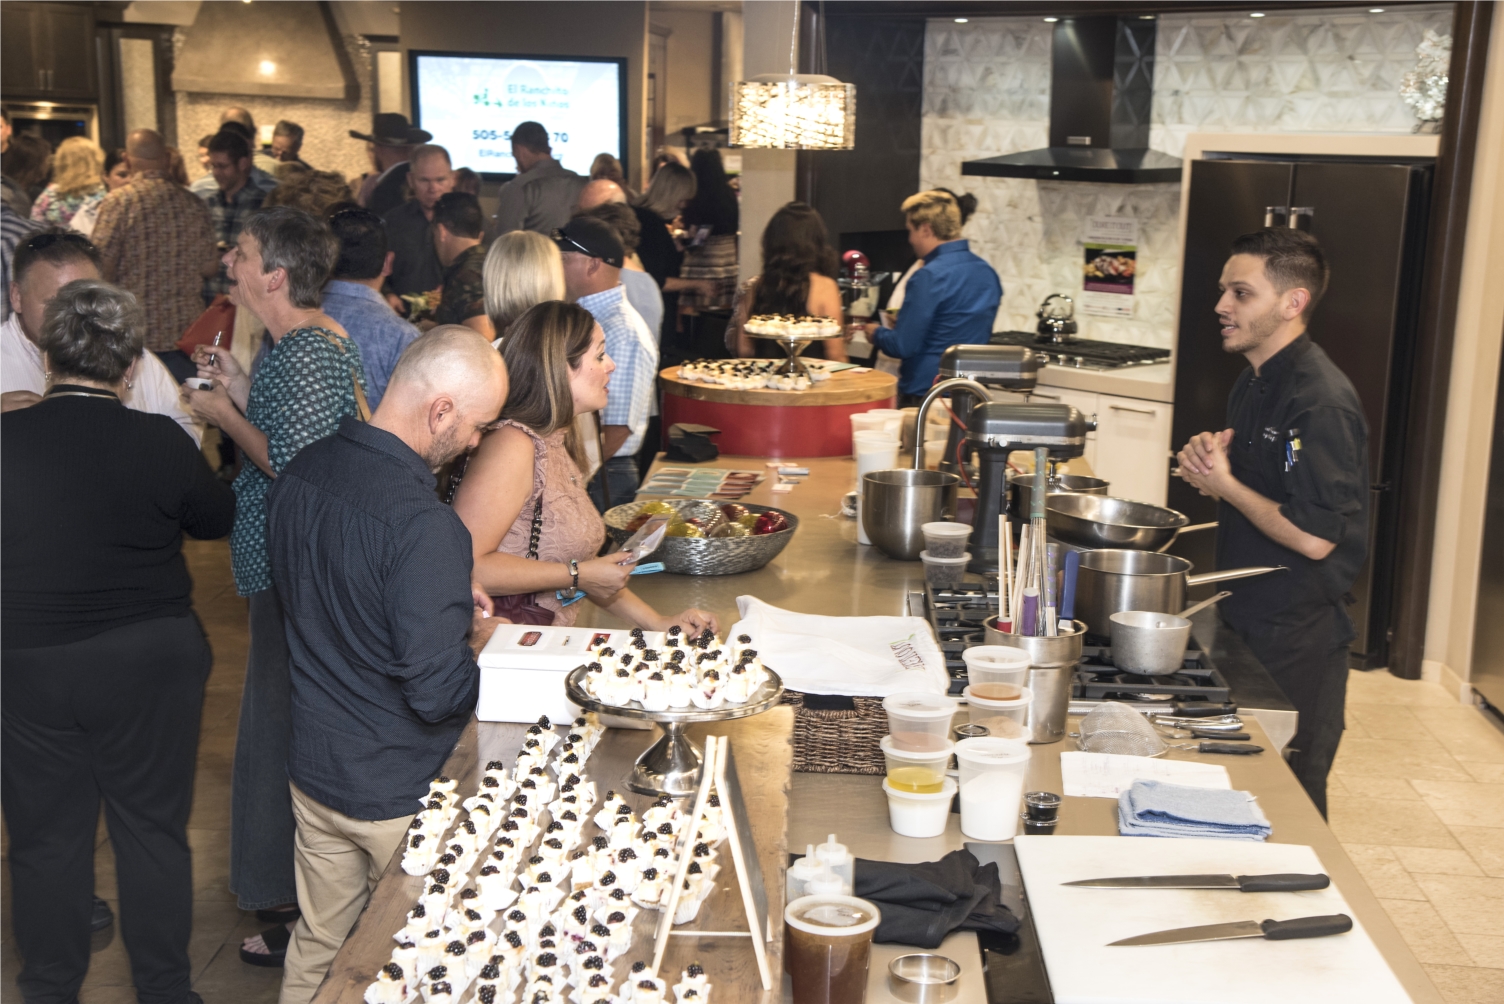 Guest enjoy sampling food at Builders Source Appliance Gallery during the chef based cooking competition "DUKE IT OUT" to raise money for El Ranchito de los Ninos. 